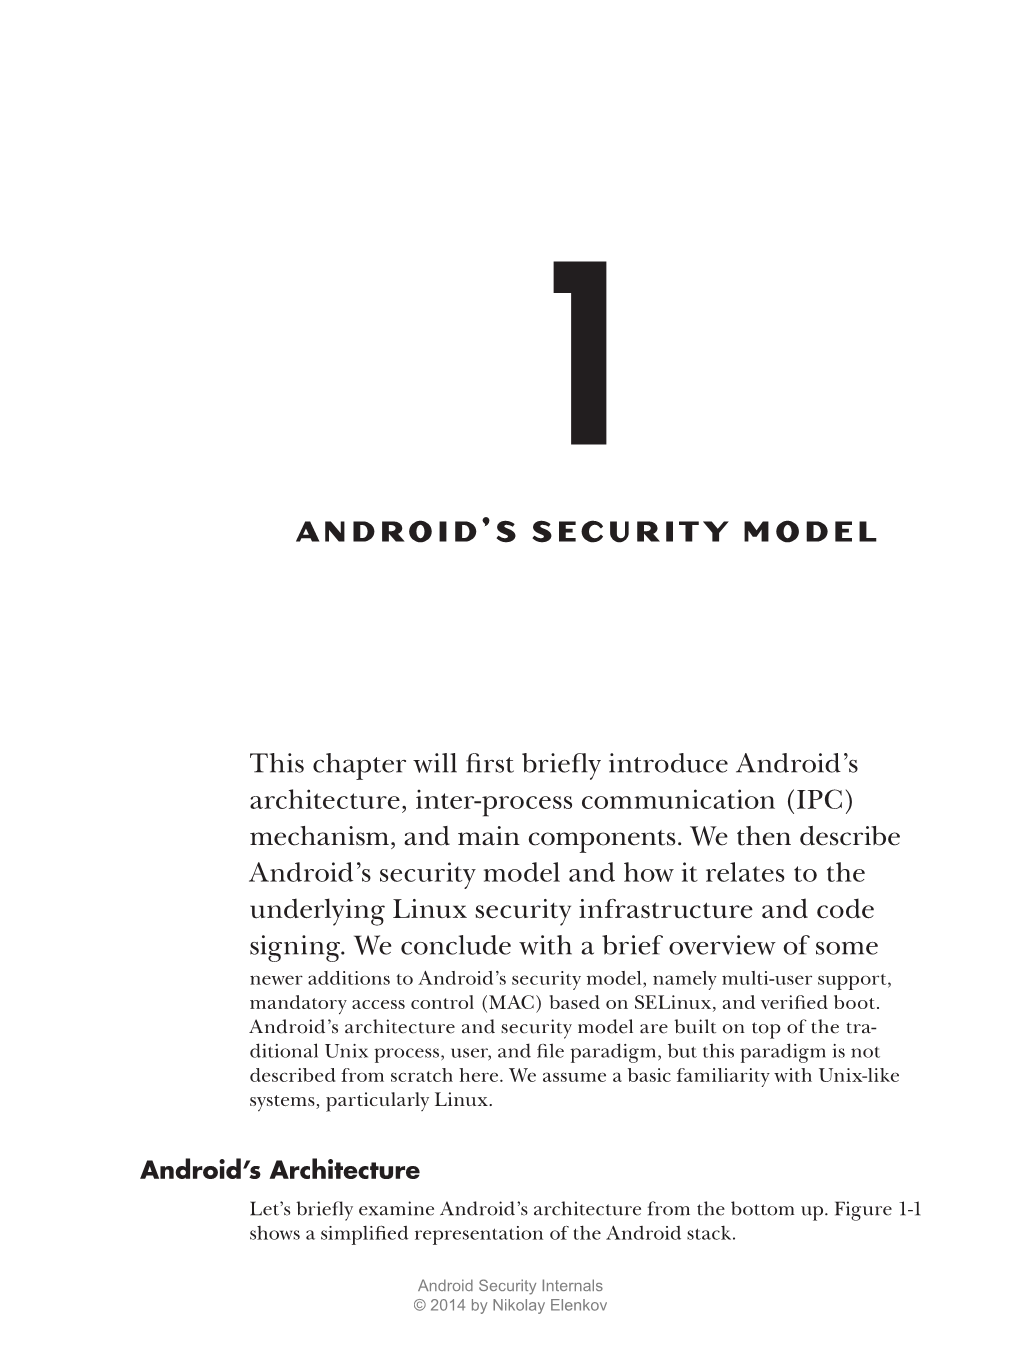 Android's Security Model